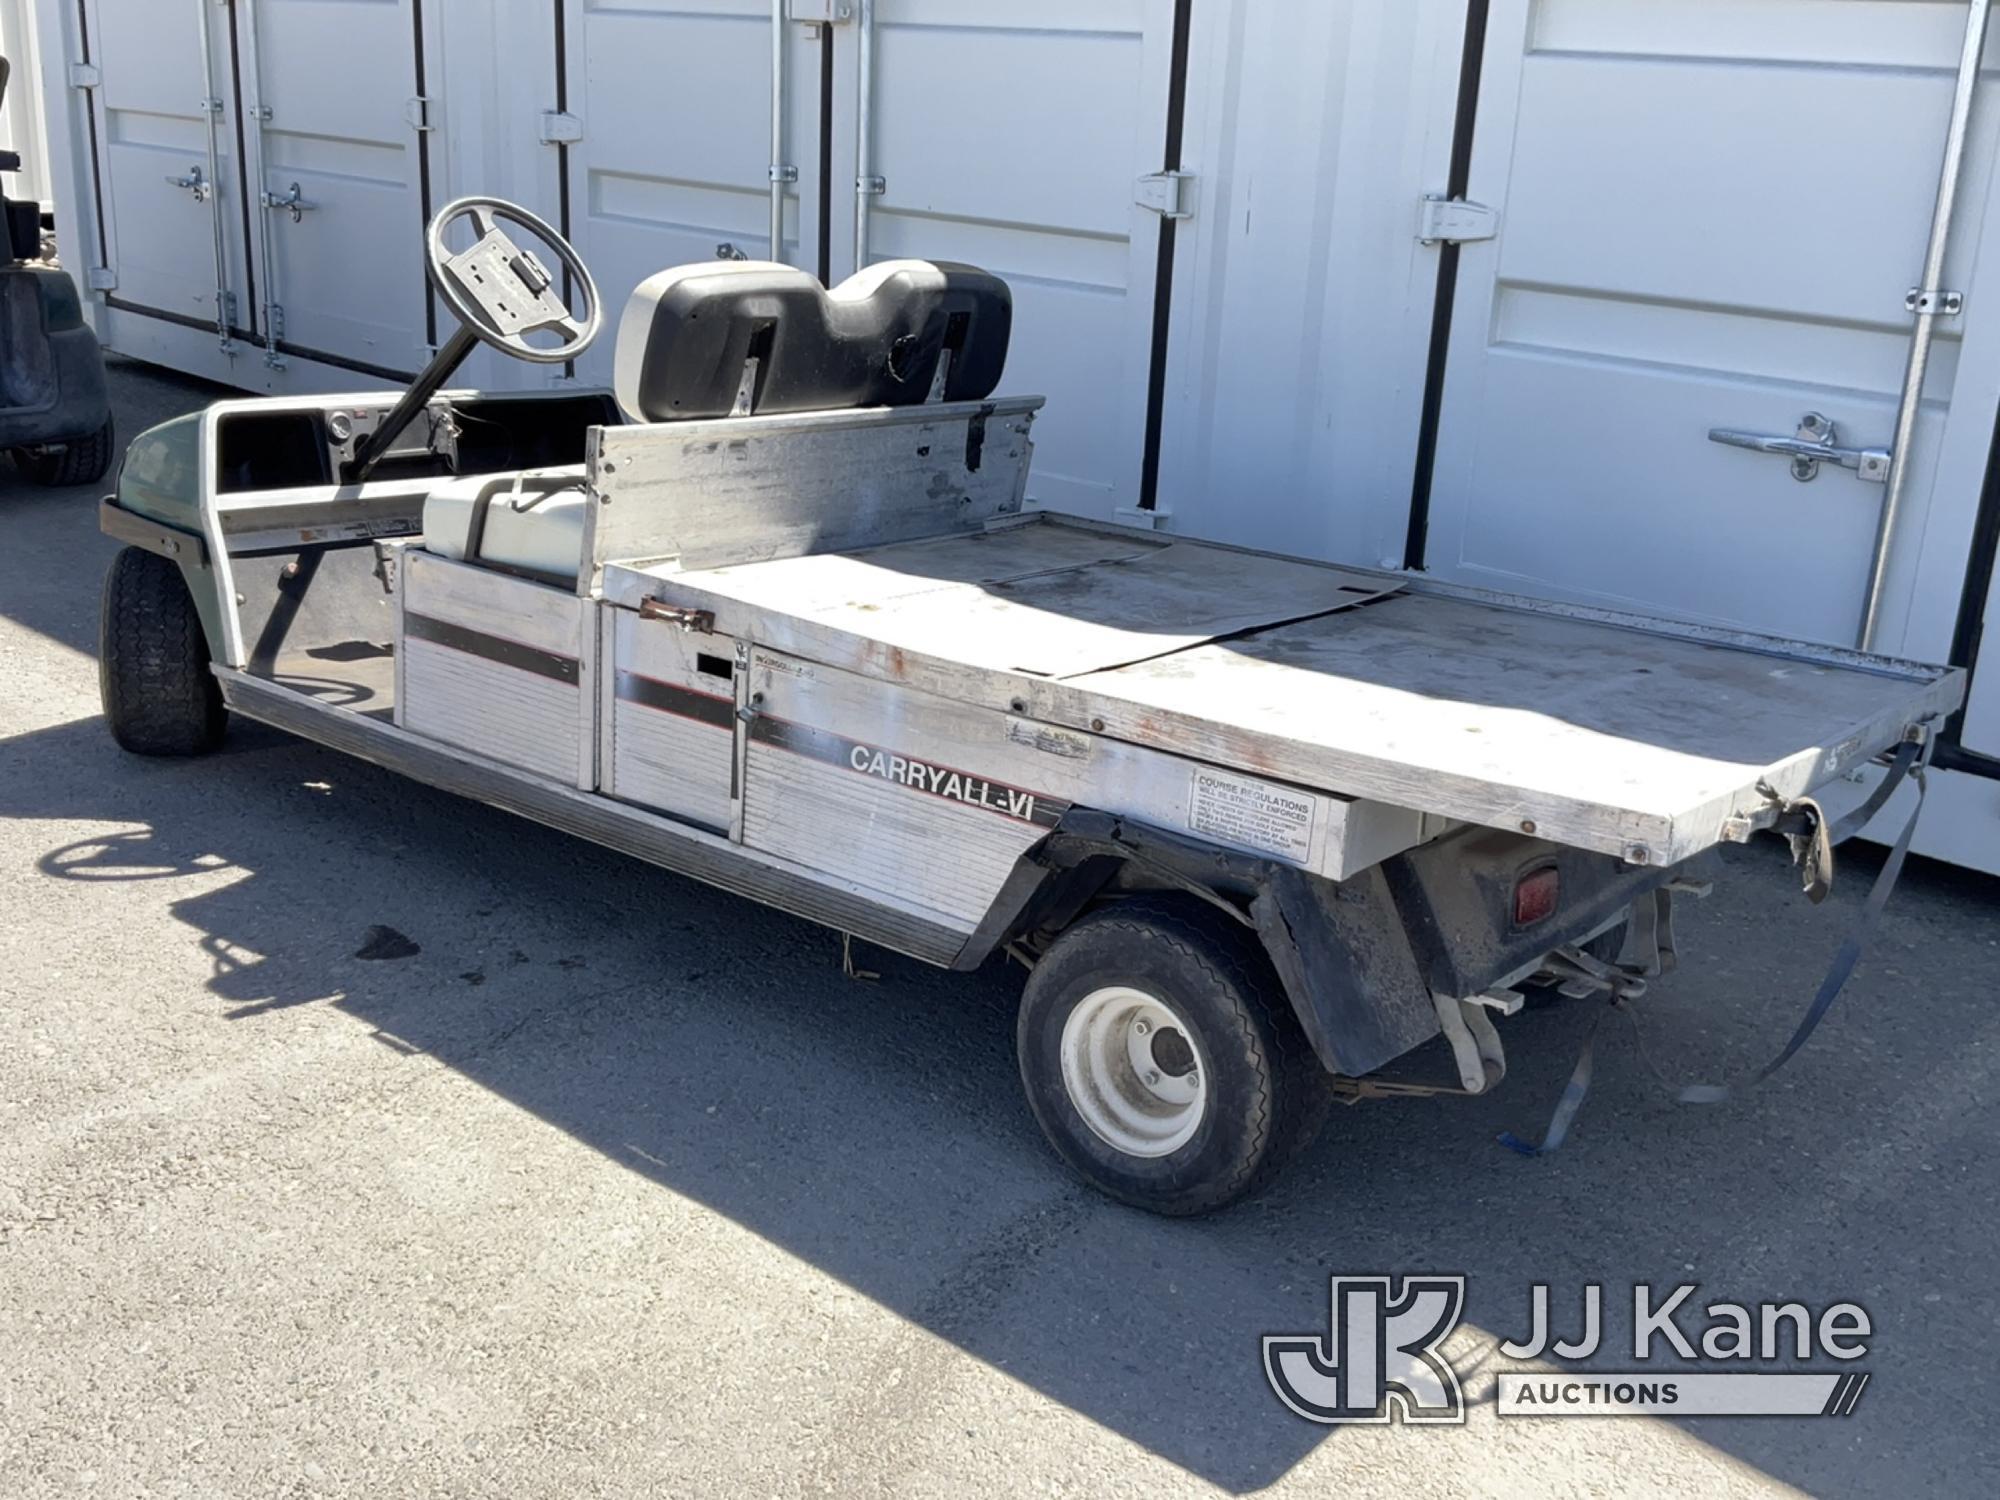 (Dixon, CA) Club Car CarryAll VI Not Running, Conditions Unknown